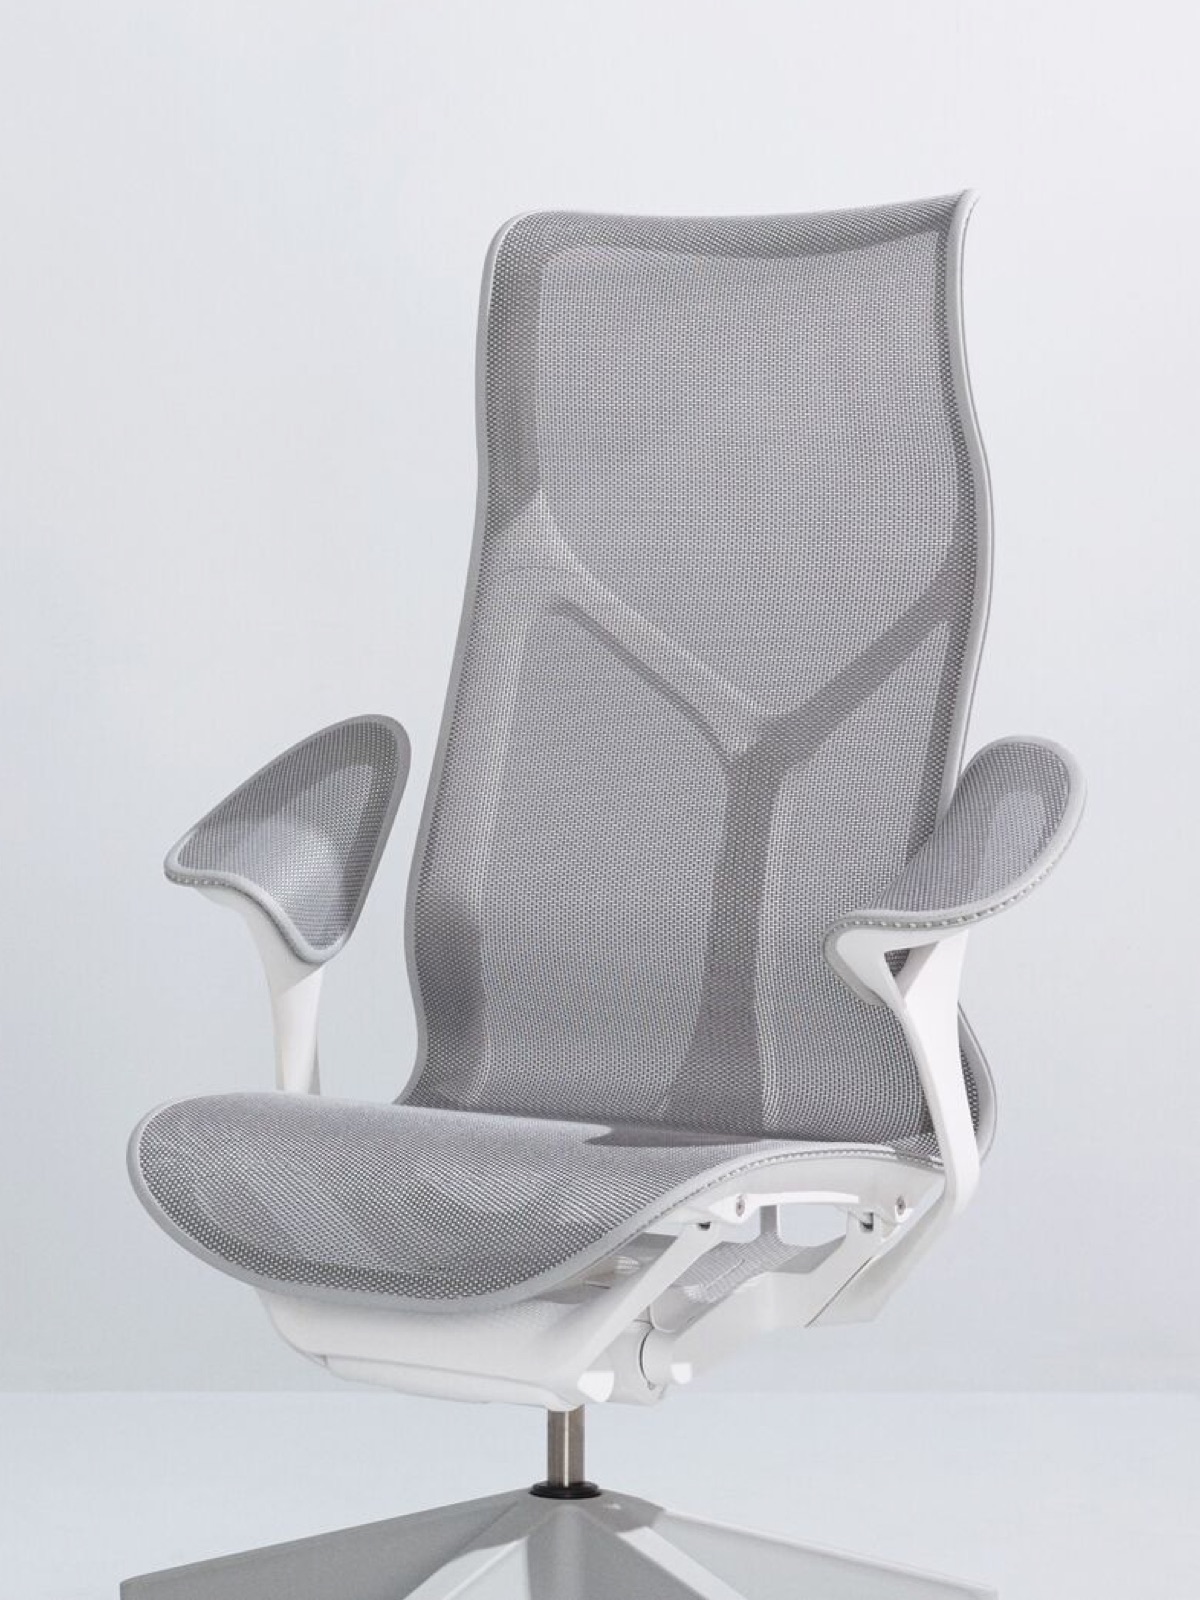 A Mineral grey high-back Cosm Chair with a white frame and leaf arms on a light grey background.